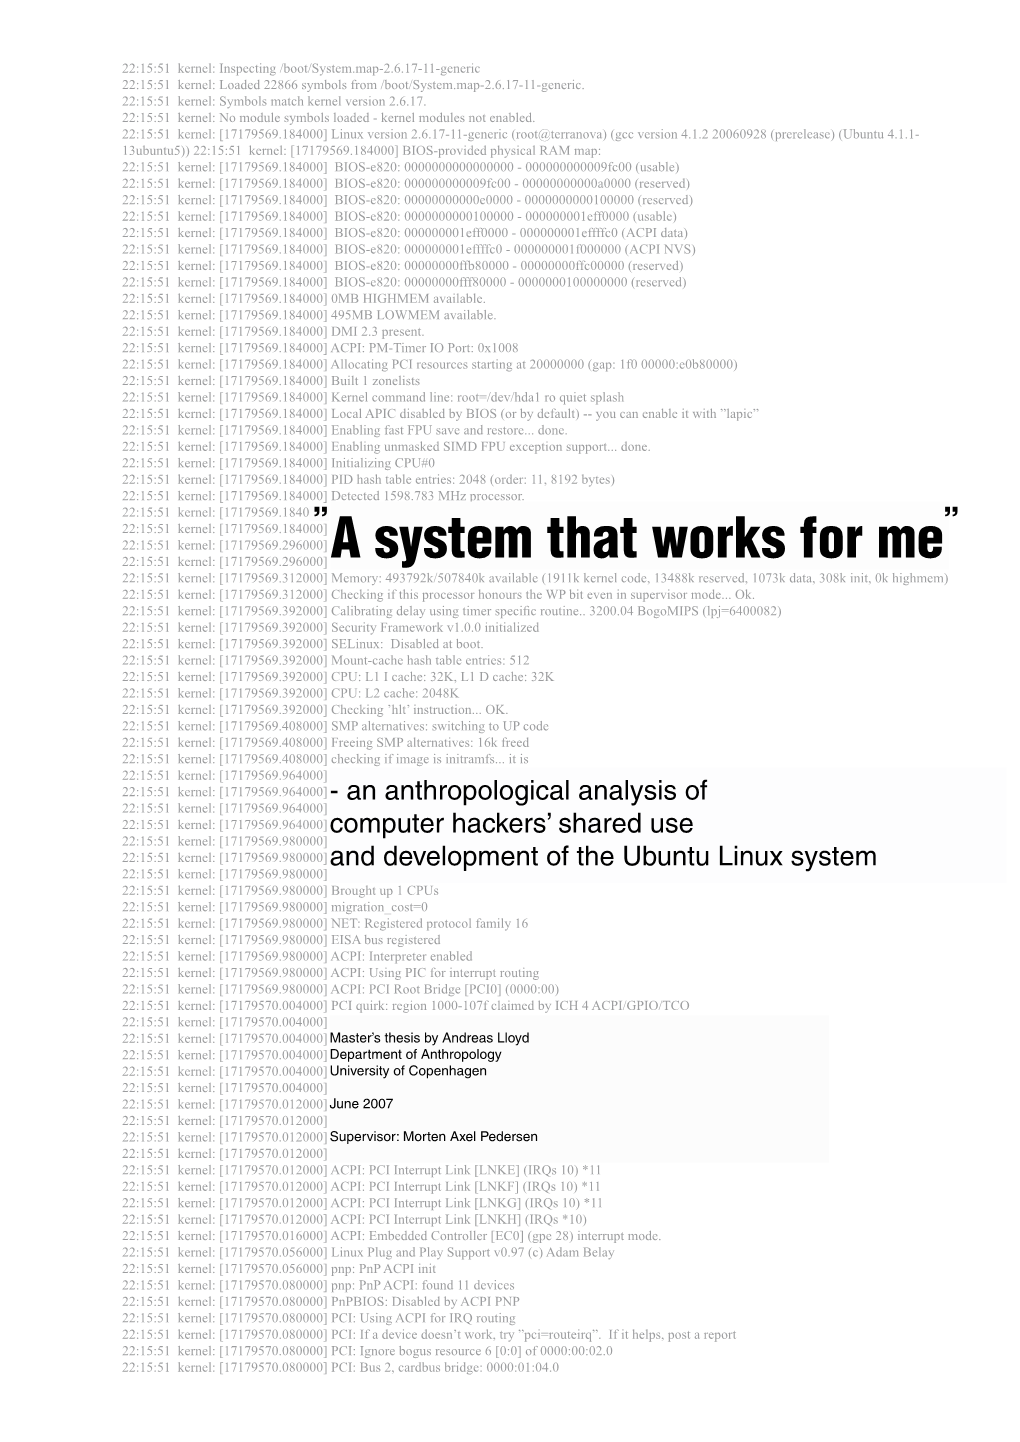 A System That Works for Me” – How Ubuntu Hackers Use and Configure Their System